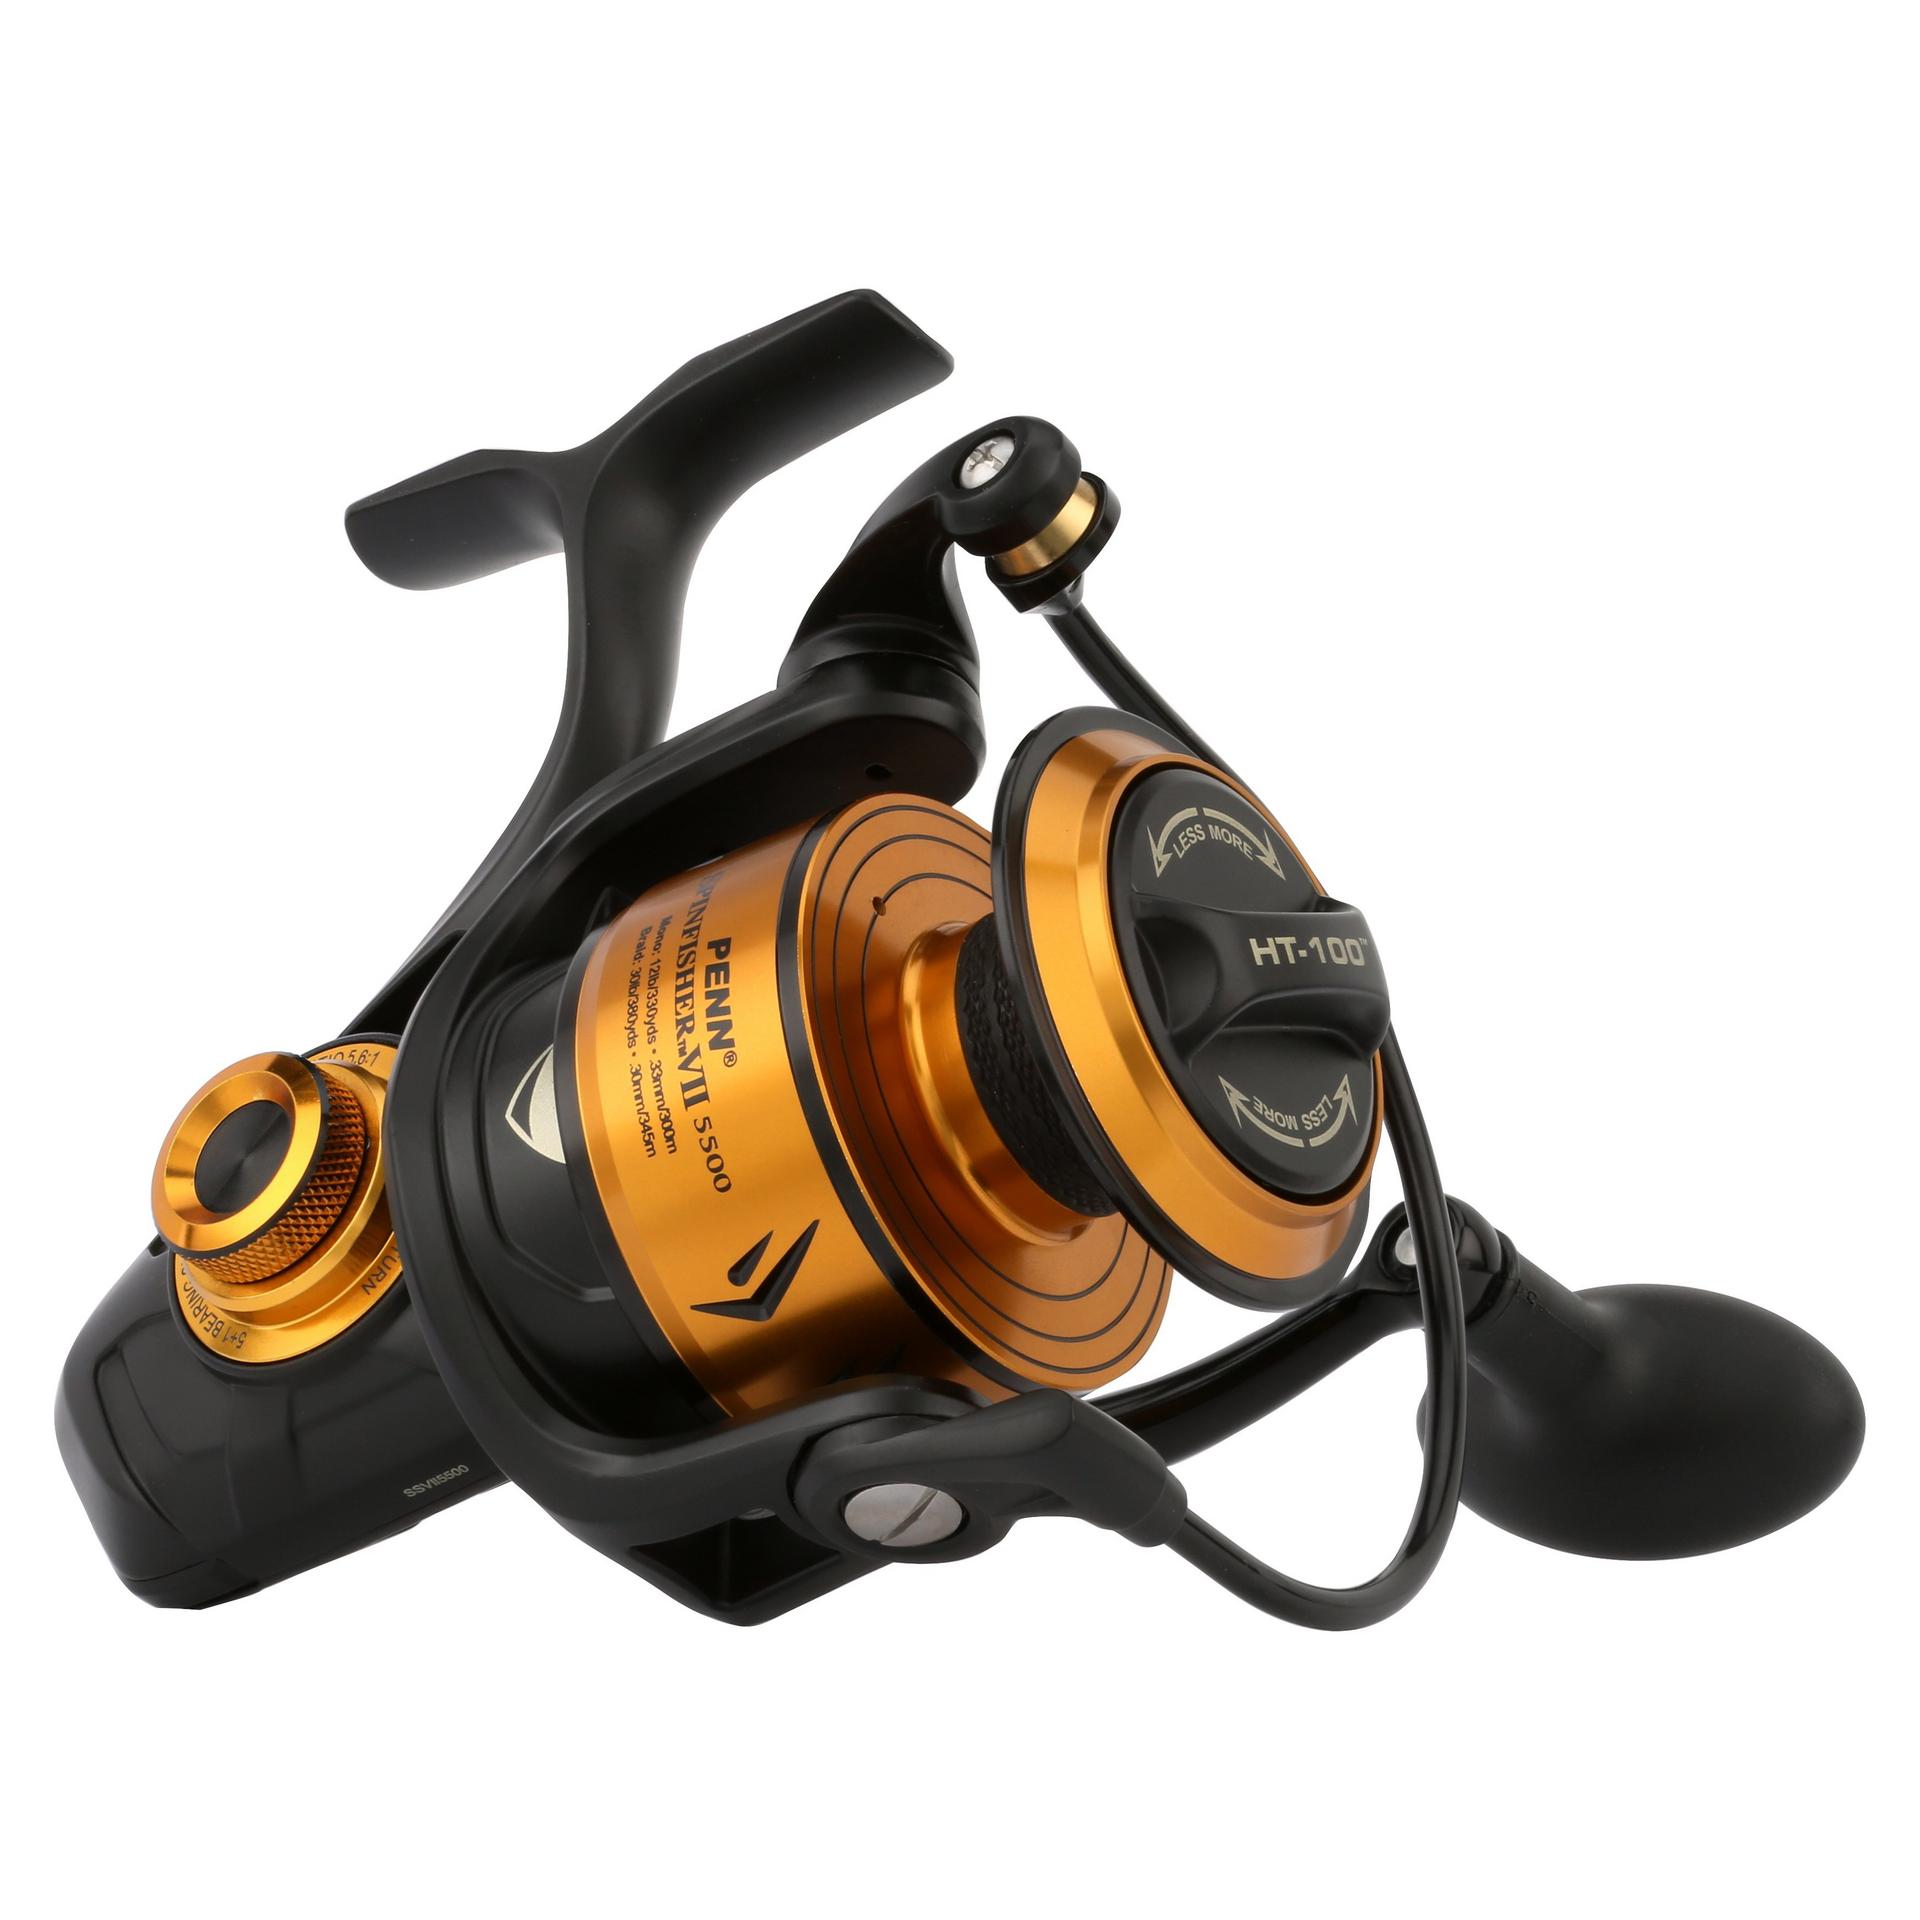 Spinning Reels - ACCESSORIES & APPAREL